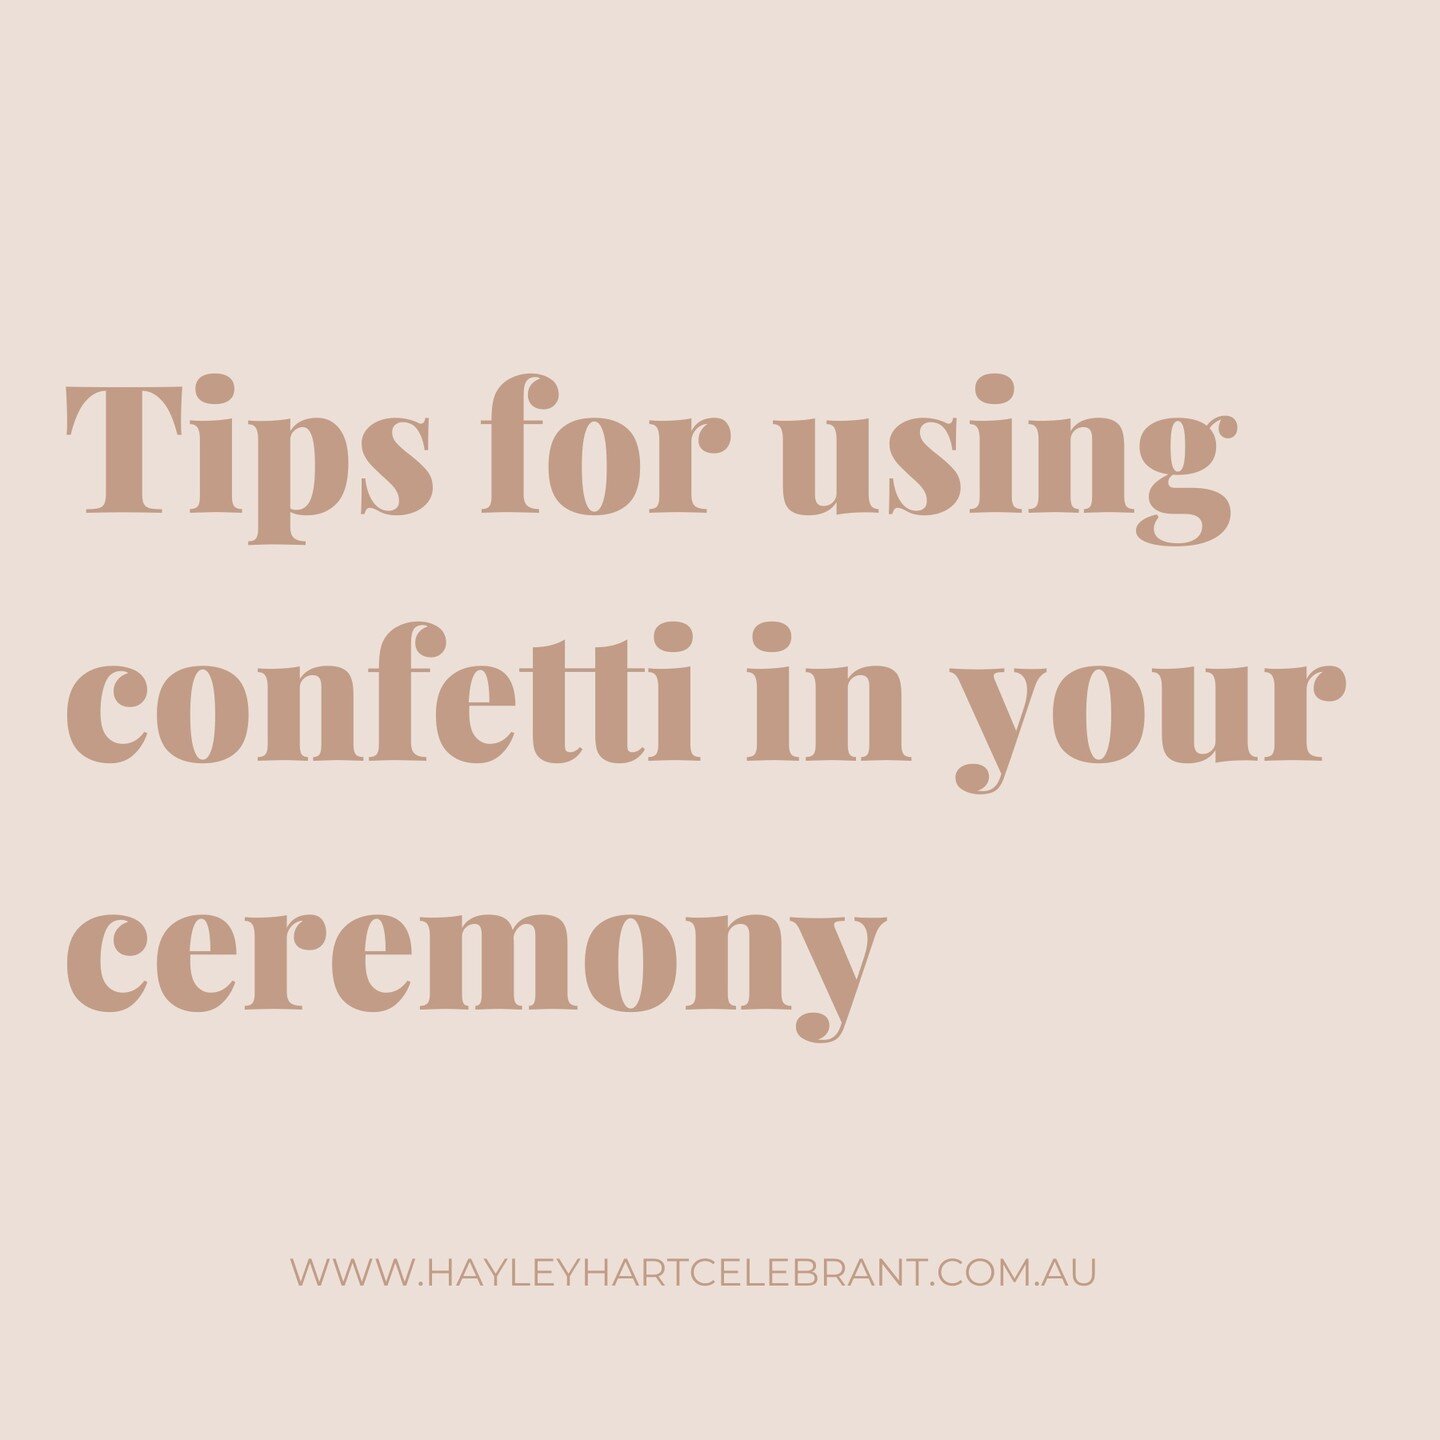 Oh my - this sweet little post is giving all the feels! There really is just something about using confetti in your ceremony - it makes everyones face beam with pure happiness! 

Now that you're sold on having it as part of your day, you now need to 